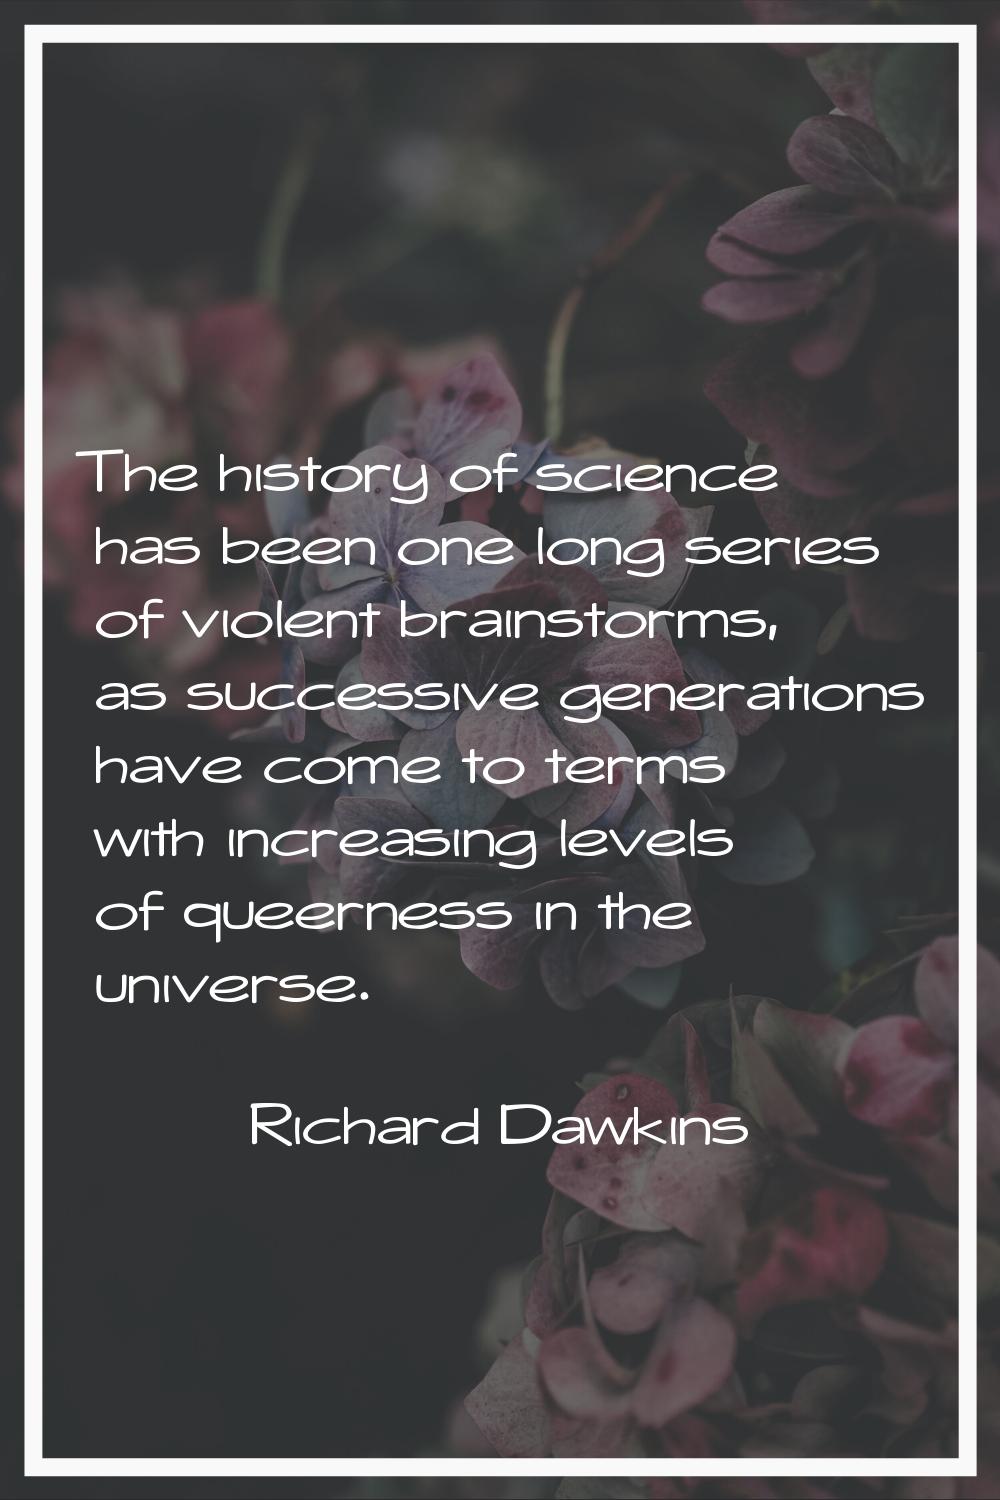 The history of science has been one long series of violent brainstorms, as successive generations h